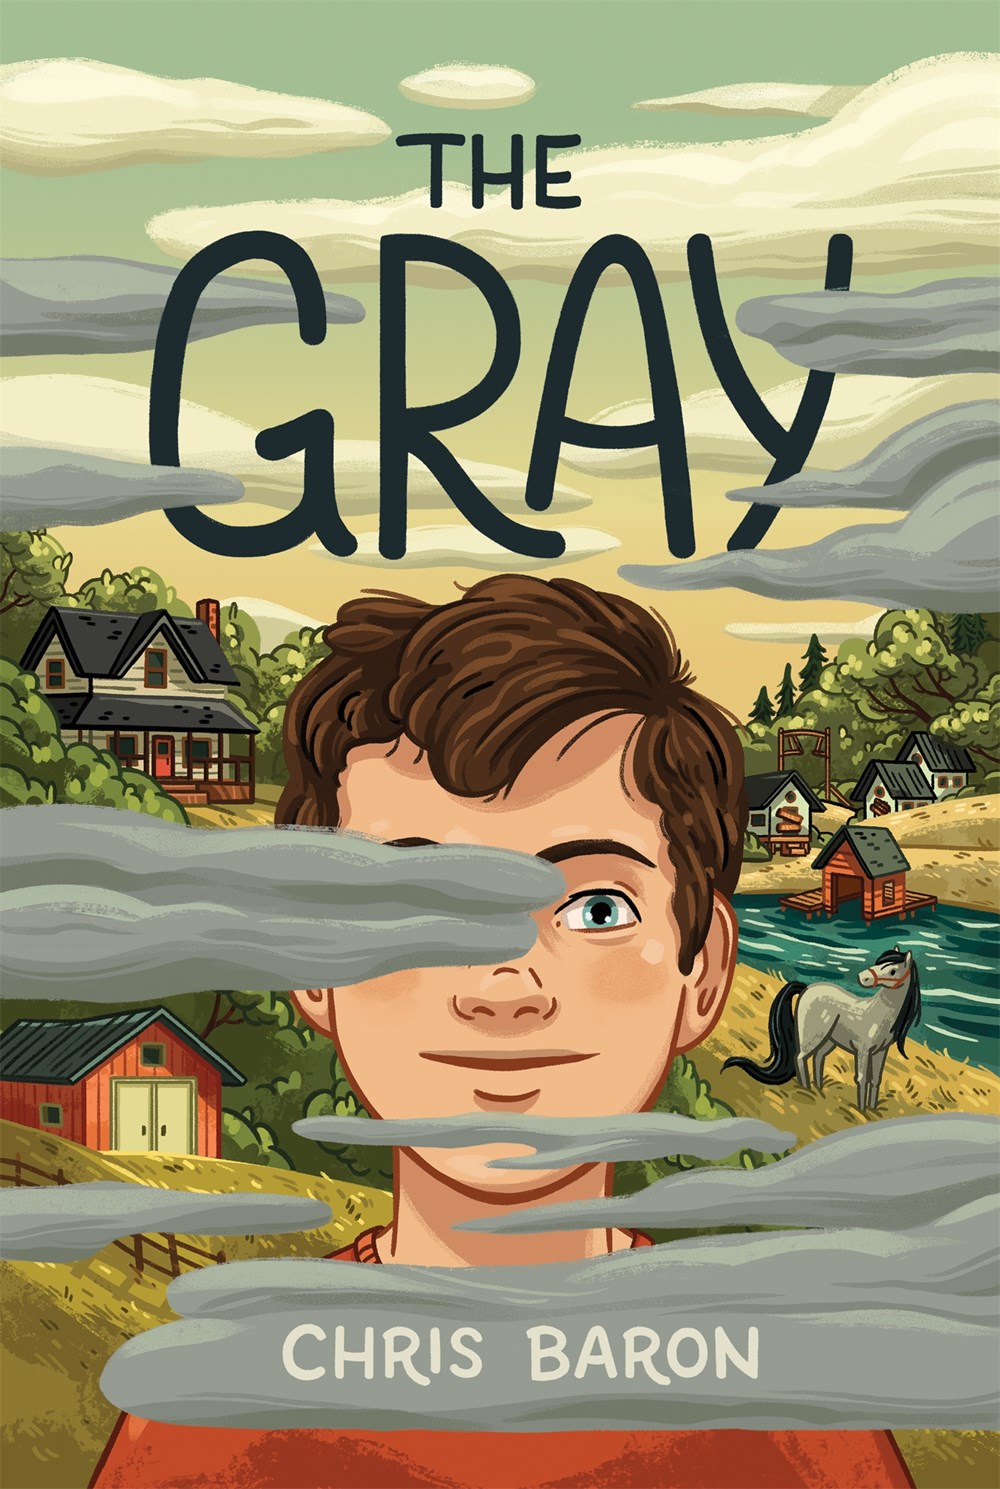 Brand New on The Yarn Podcast: Chris Baron’s THE GRAY